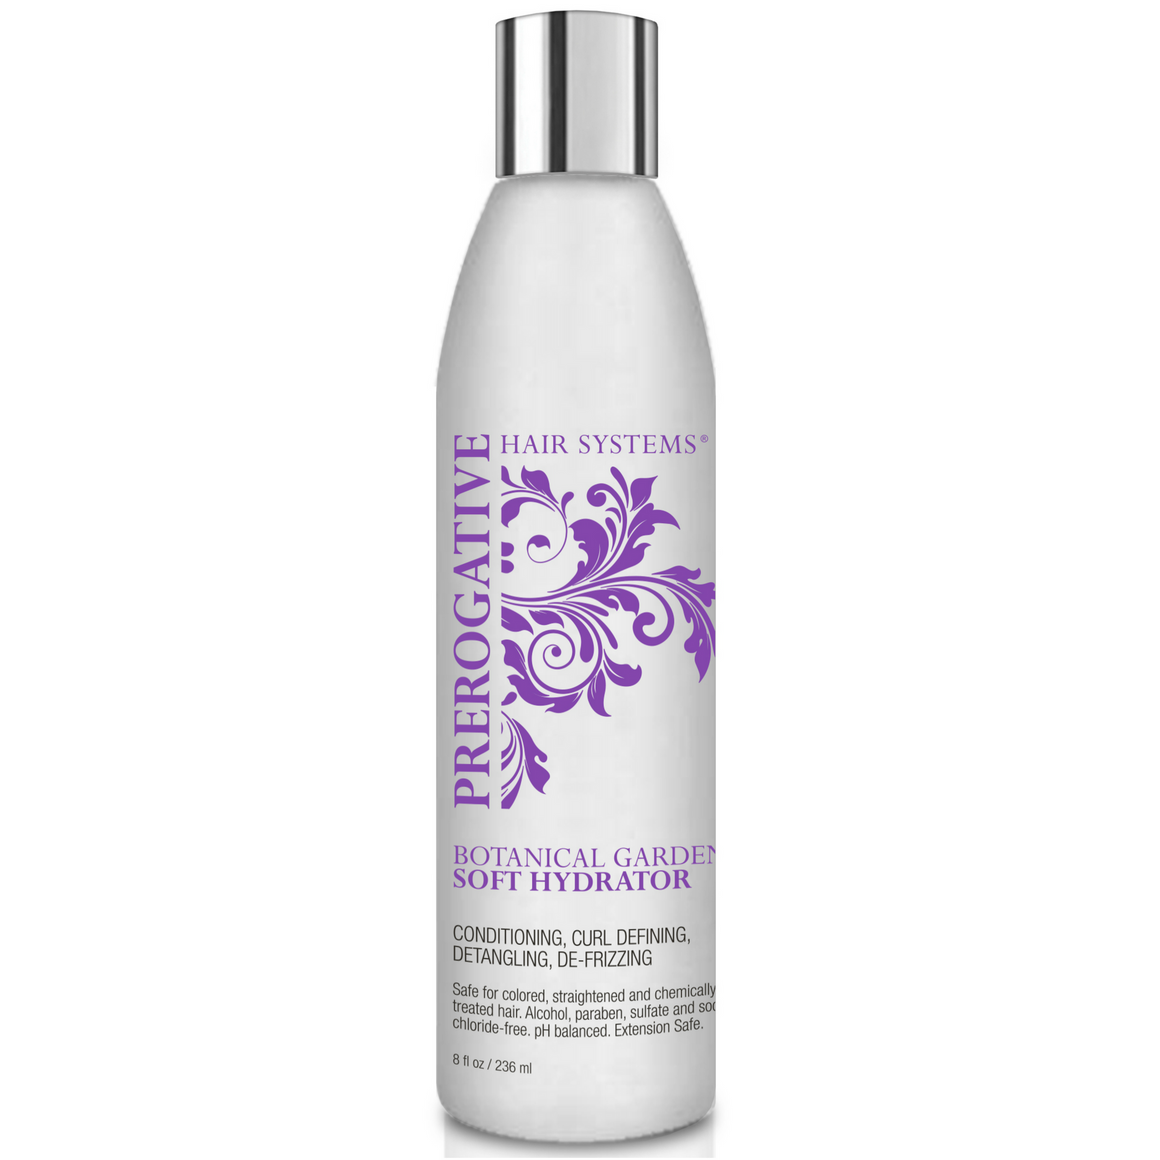 BOTANICAL GARDEN Soft Hydrator - A natural hair conditioning treatment that moisturizes dry hair, defines curls, and detangles strands.